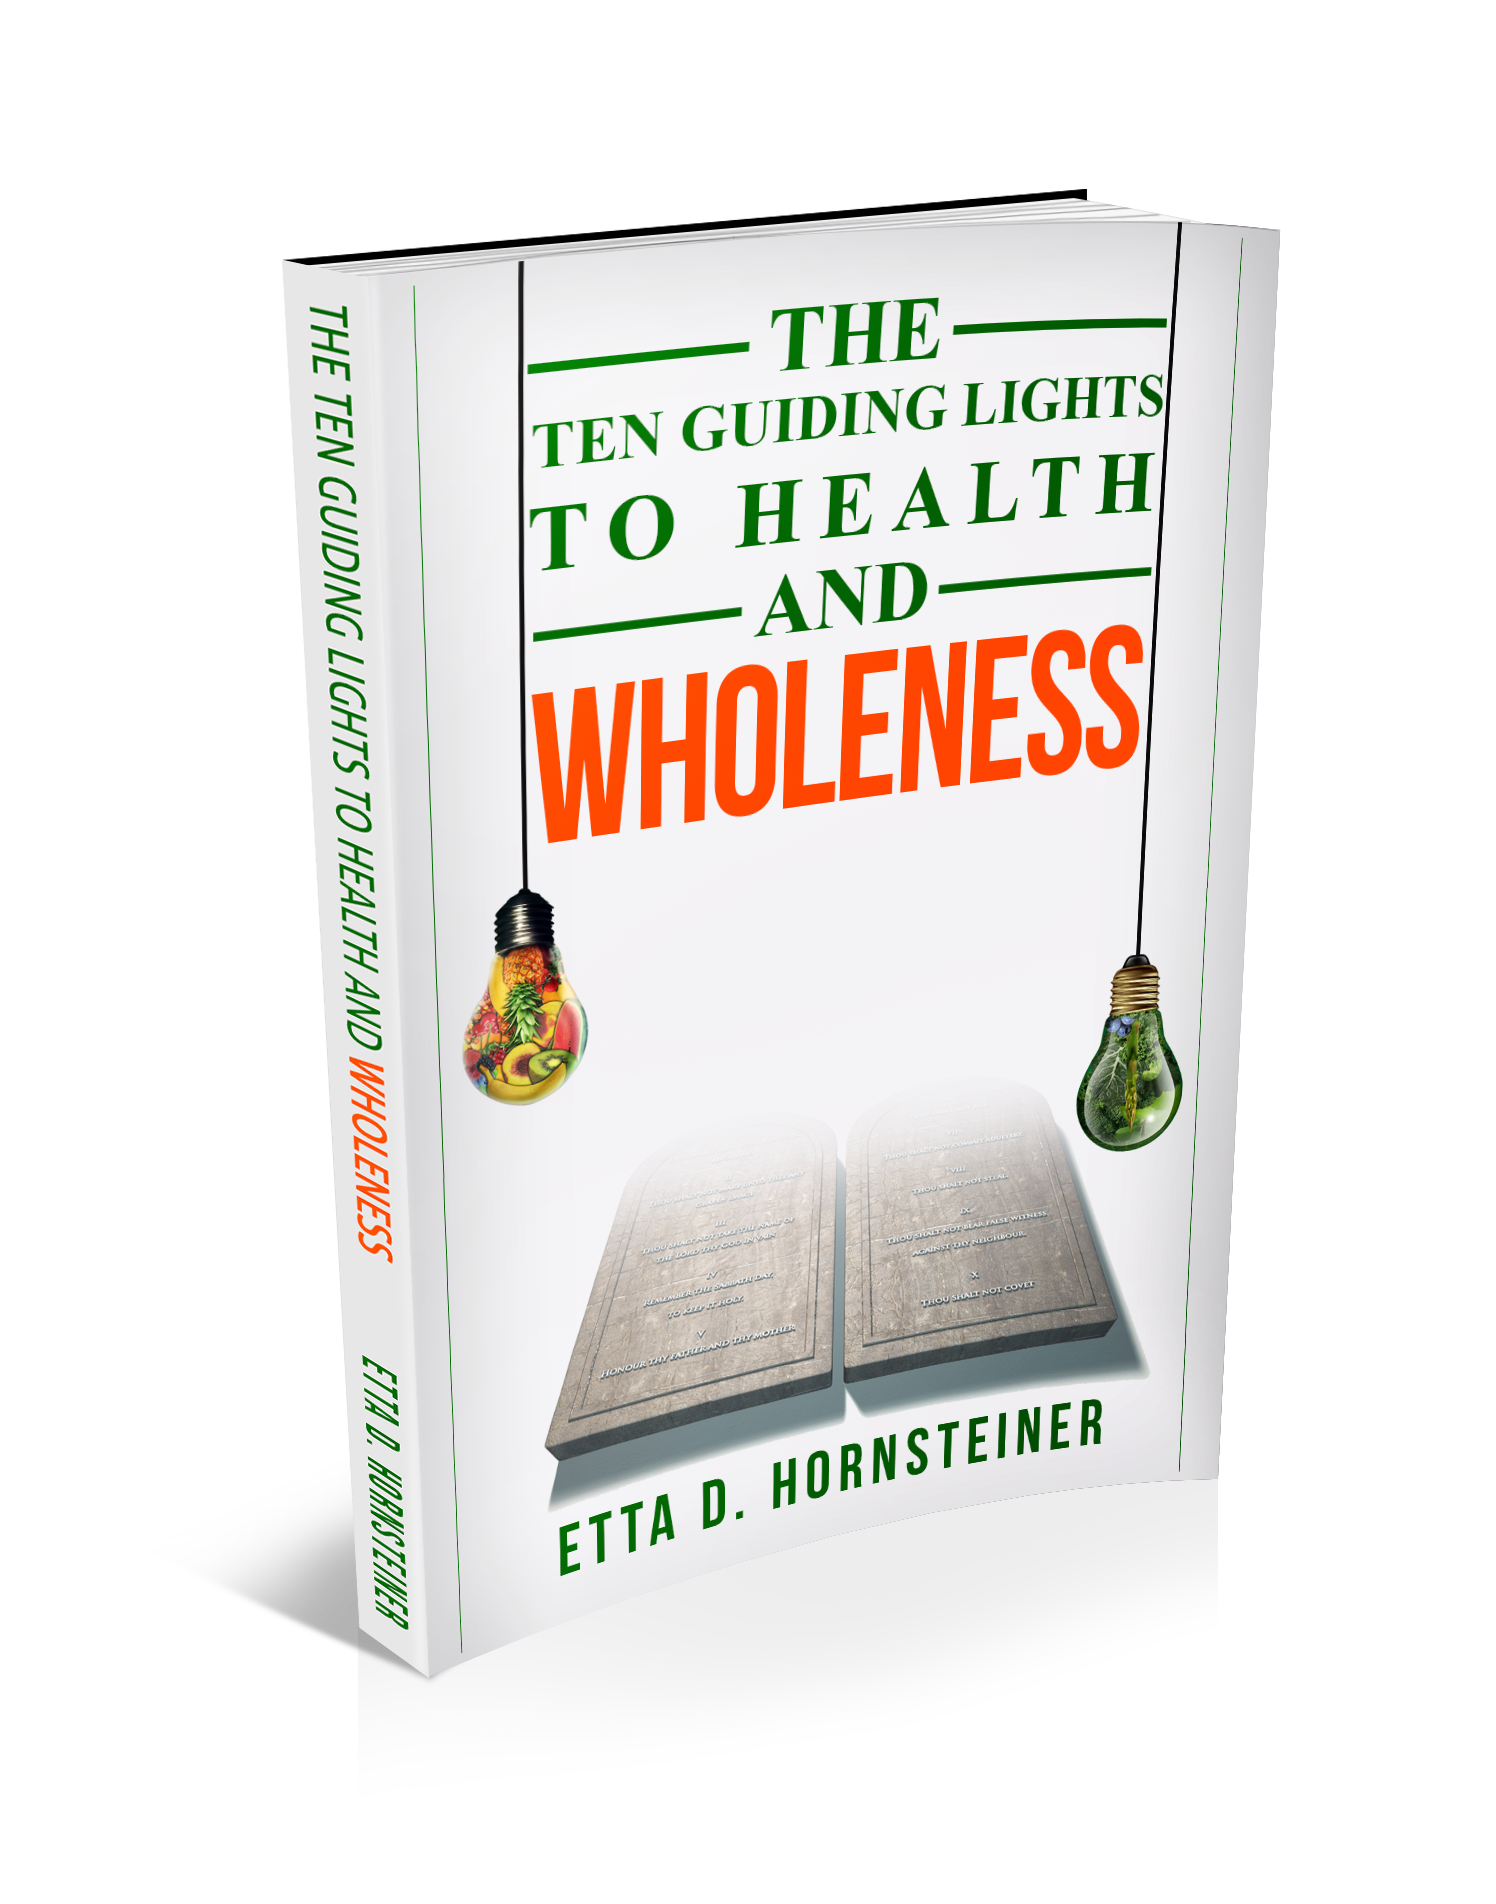 The Ten Guiding Lights to Health and Wholeness Book